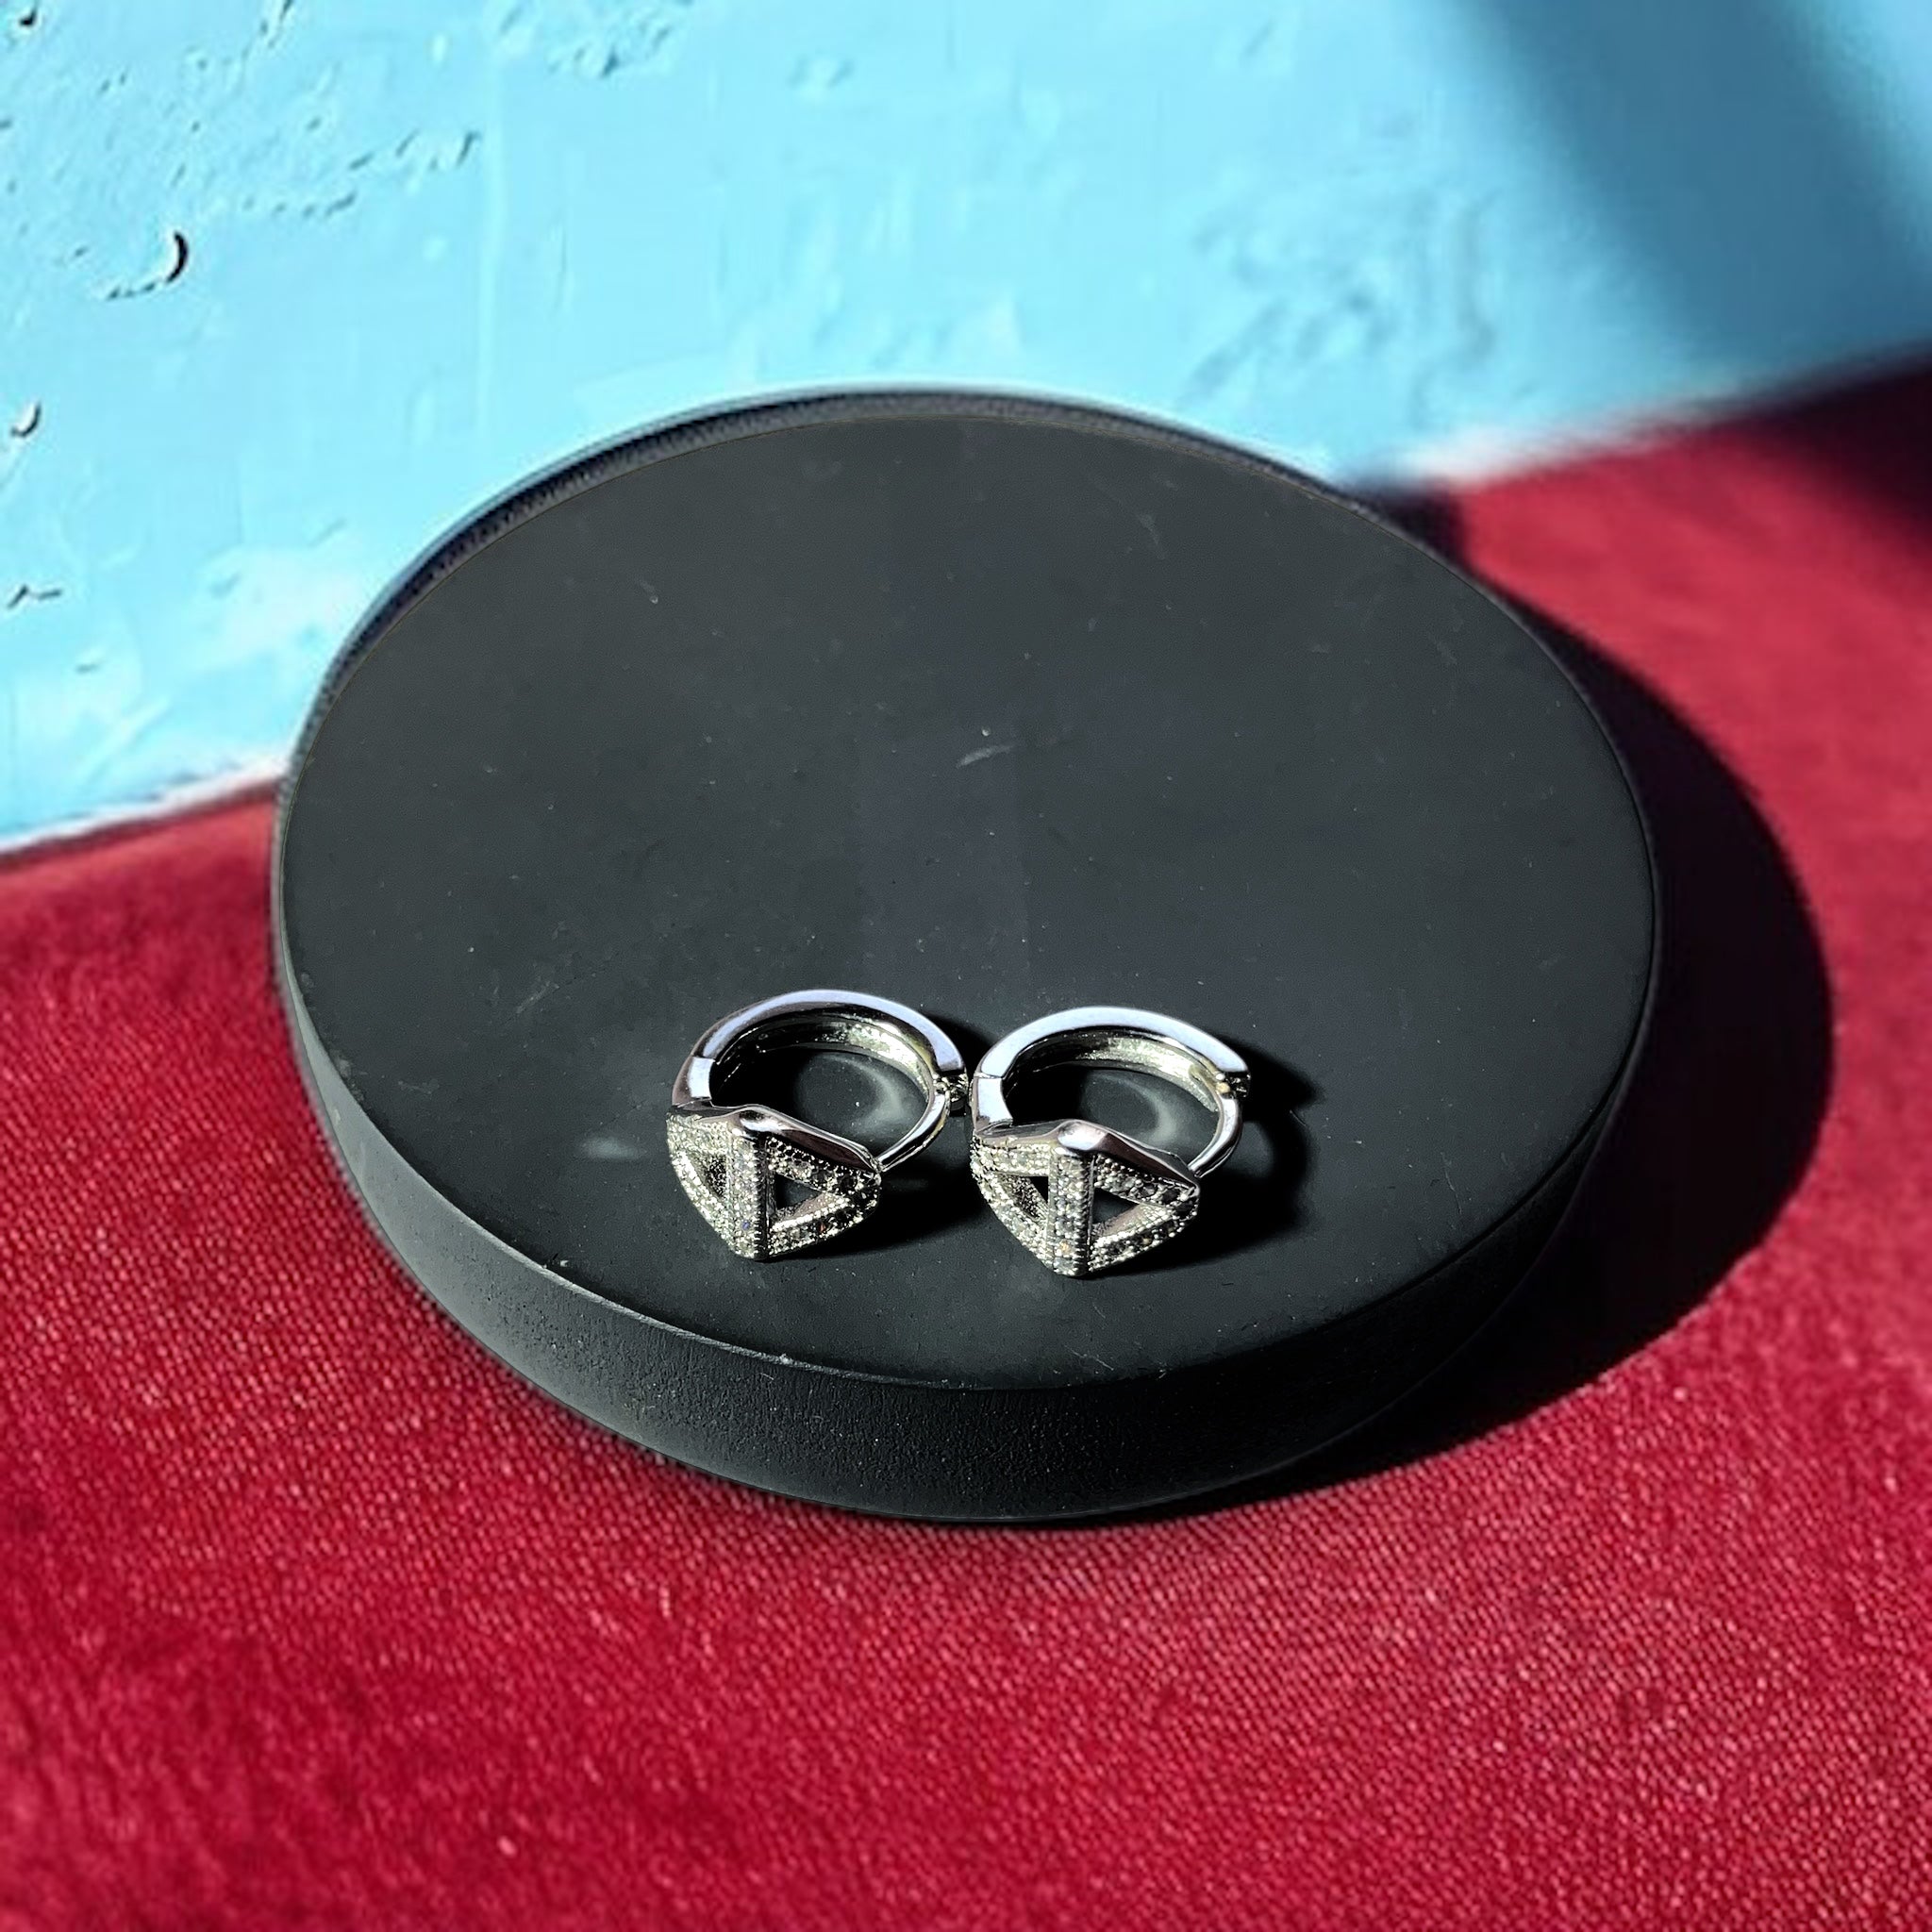 a pair of silver earrings sitting on top of a black box